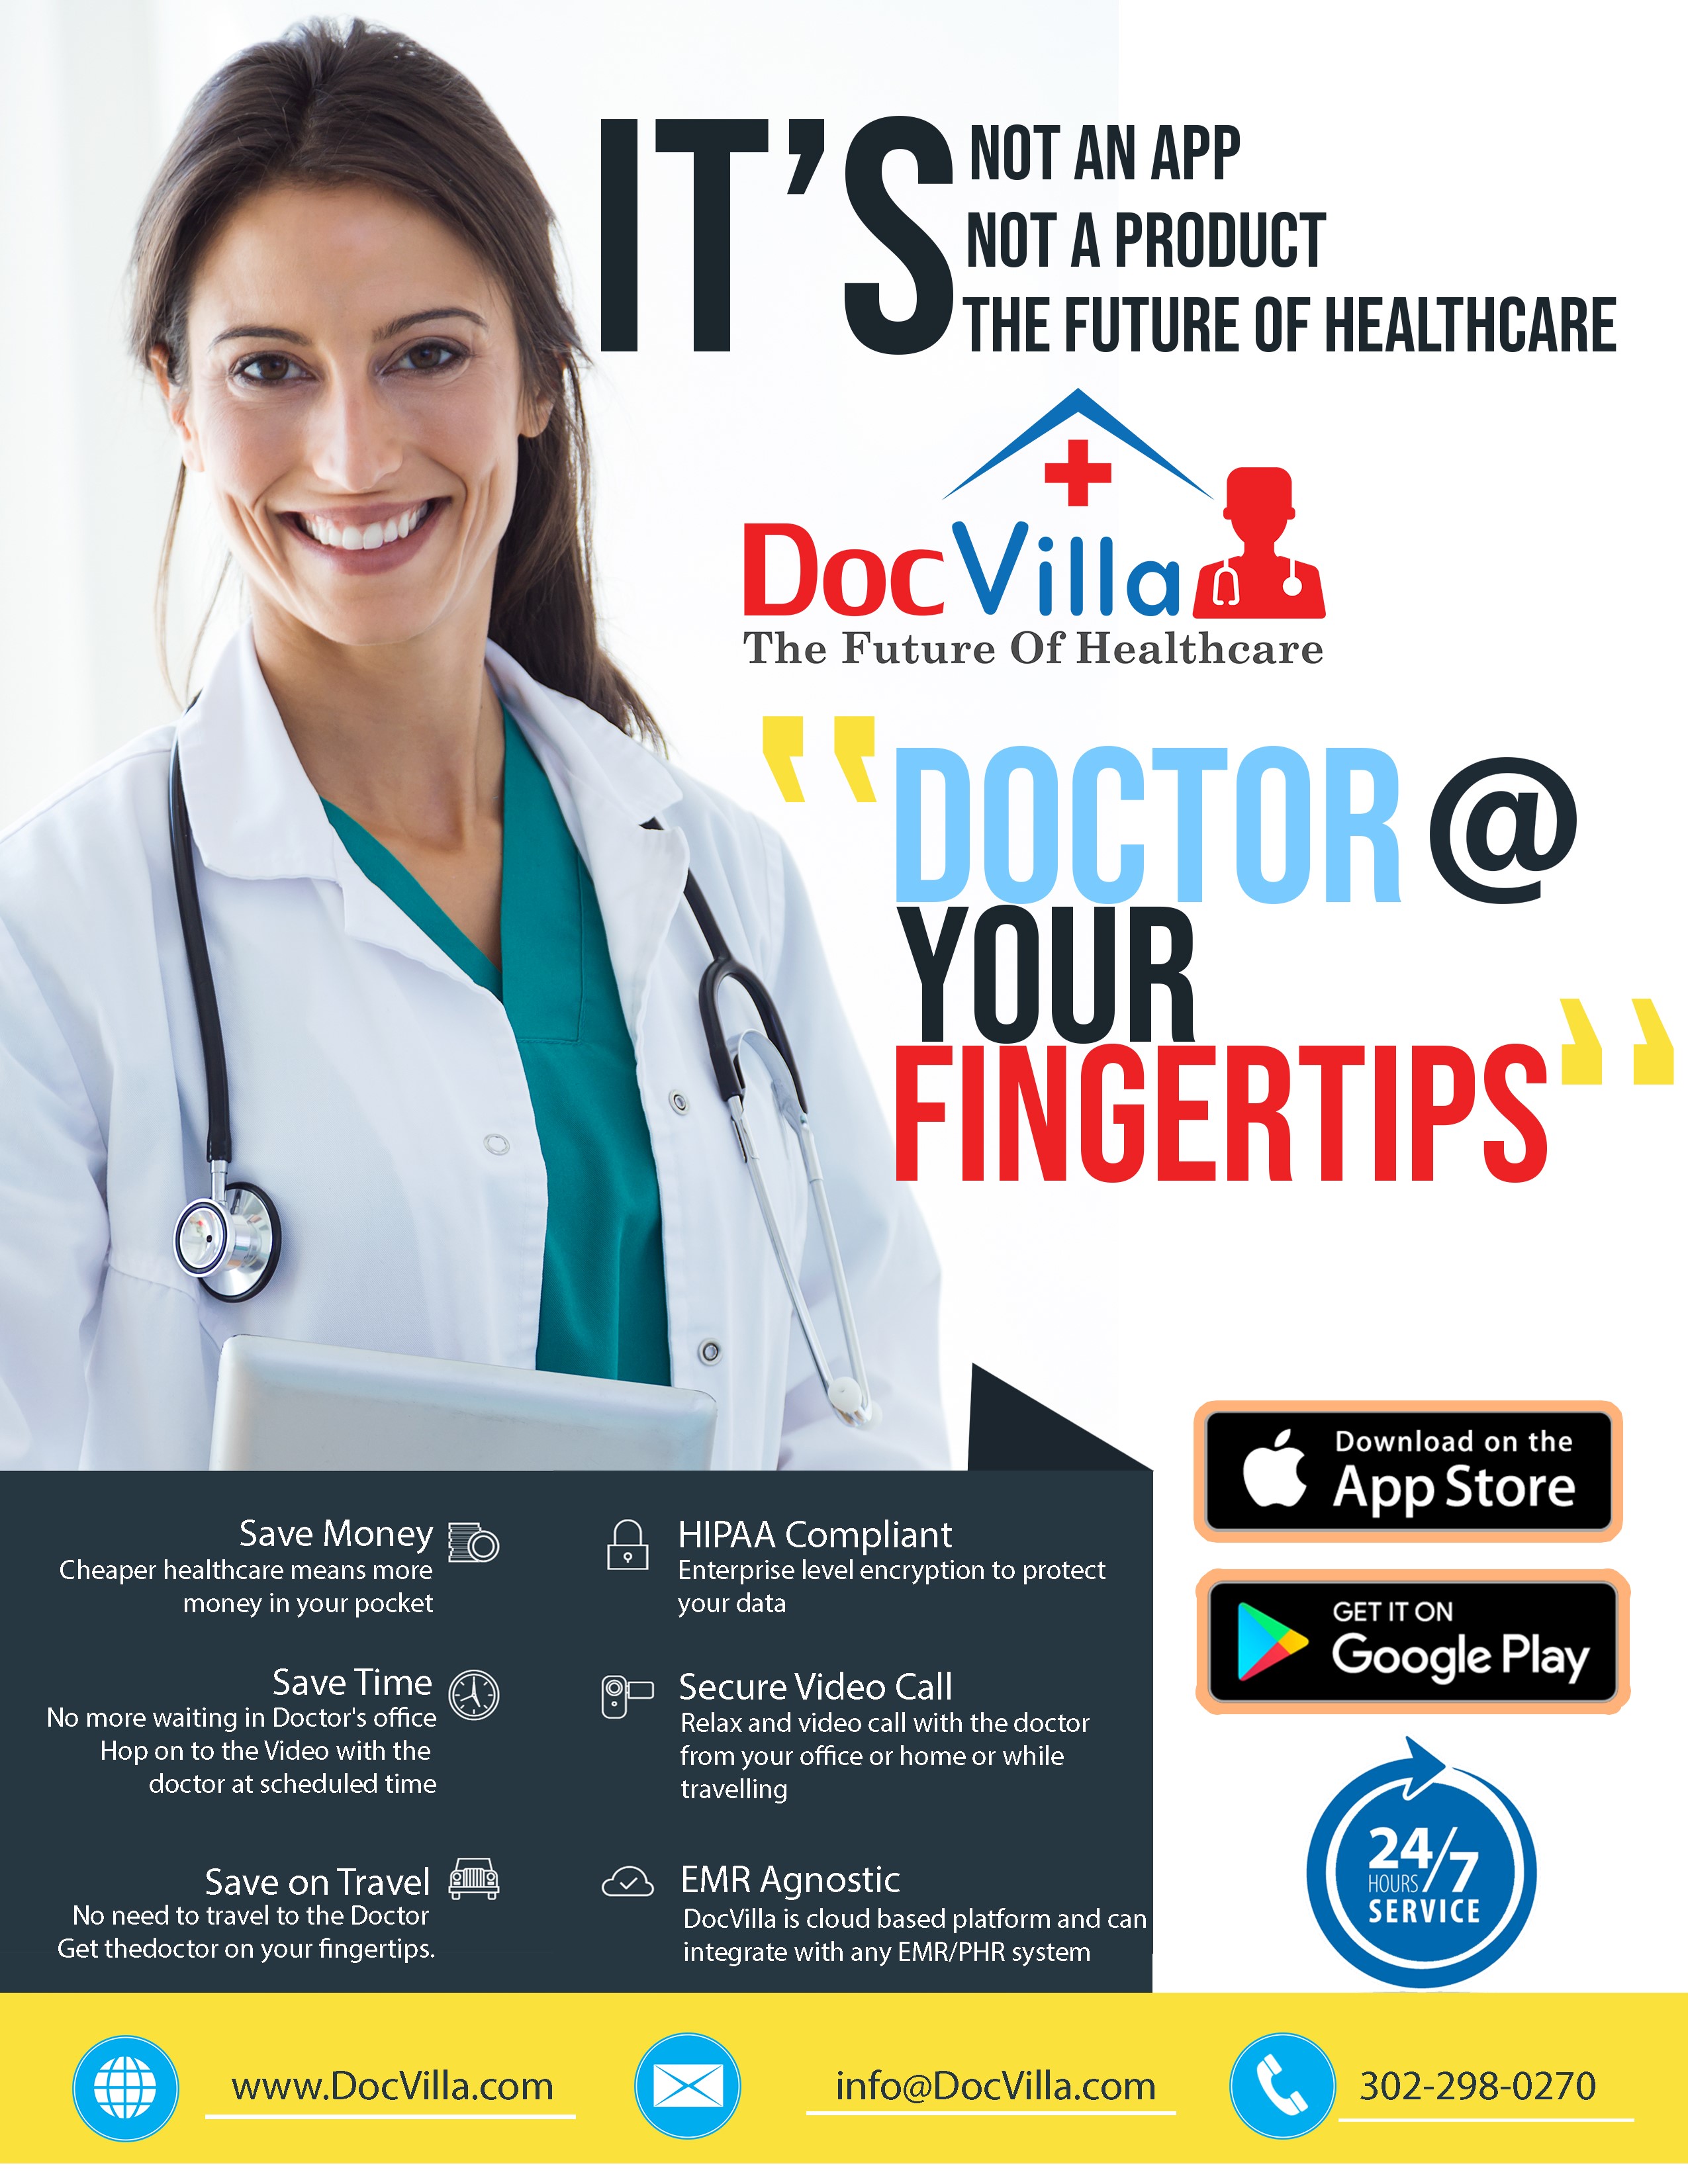 DocVilla Patient app - Patients can schedule appointment with the doctor